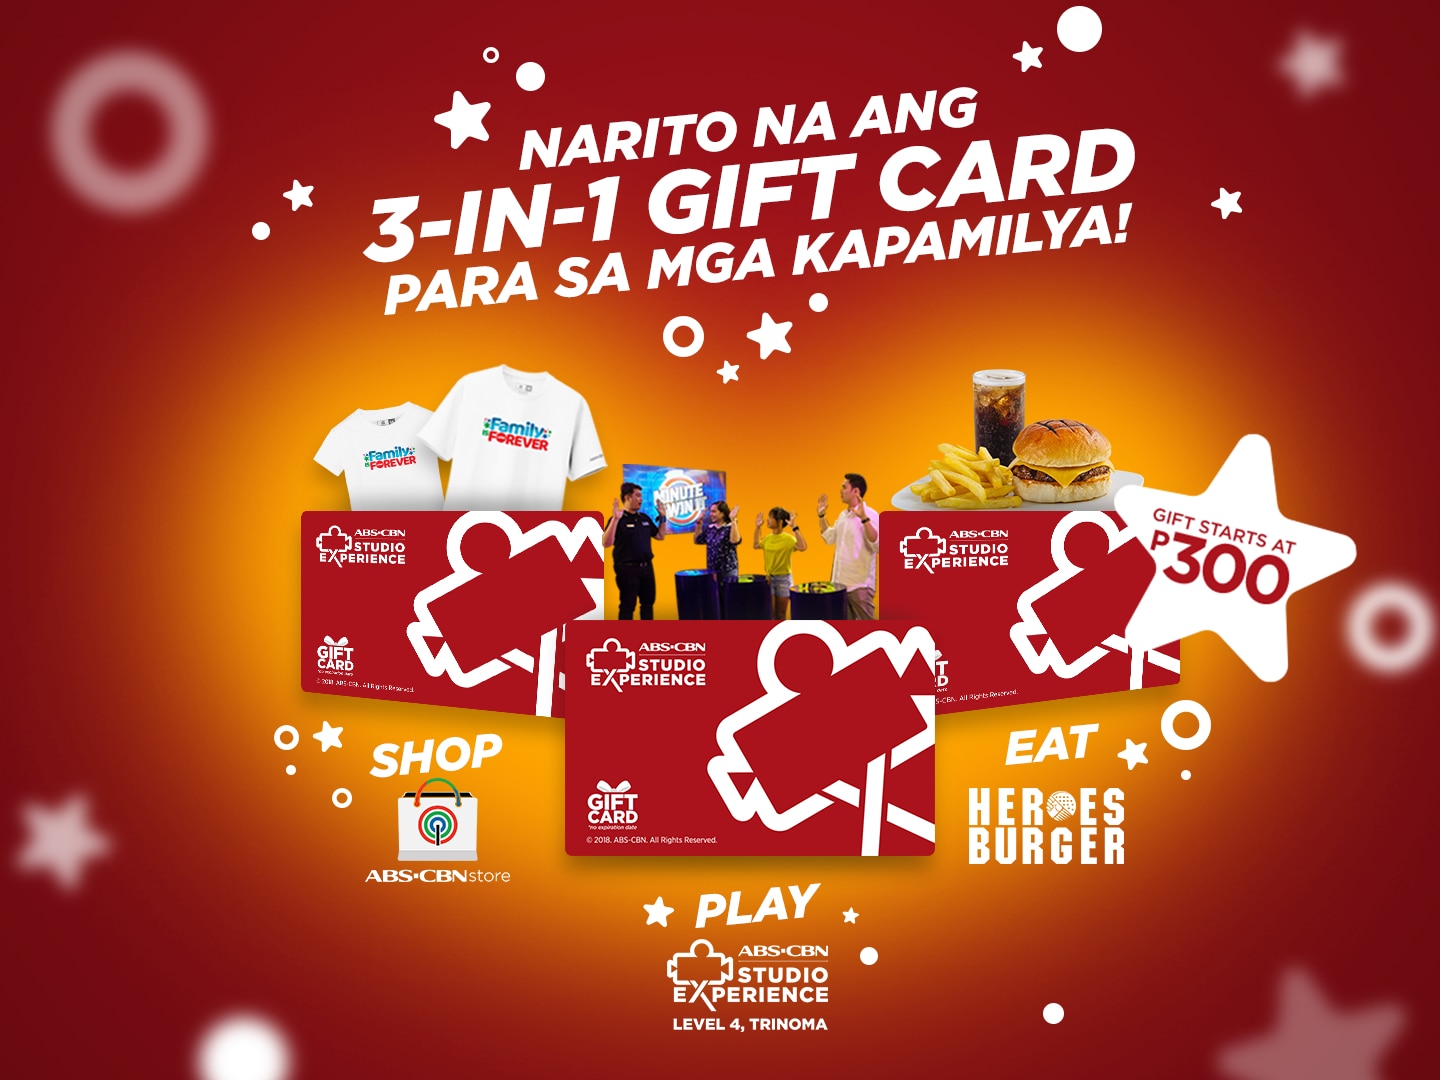 ABS-CBN Studio Experience ushers in the holiday season with three-in-one gift cards